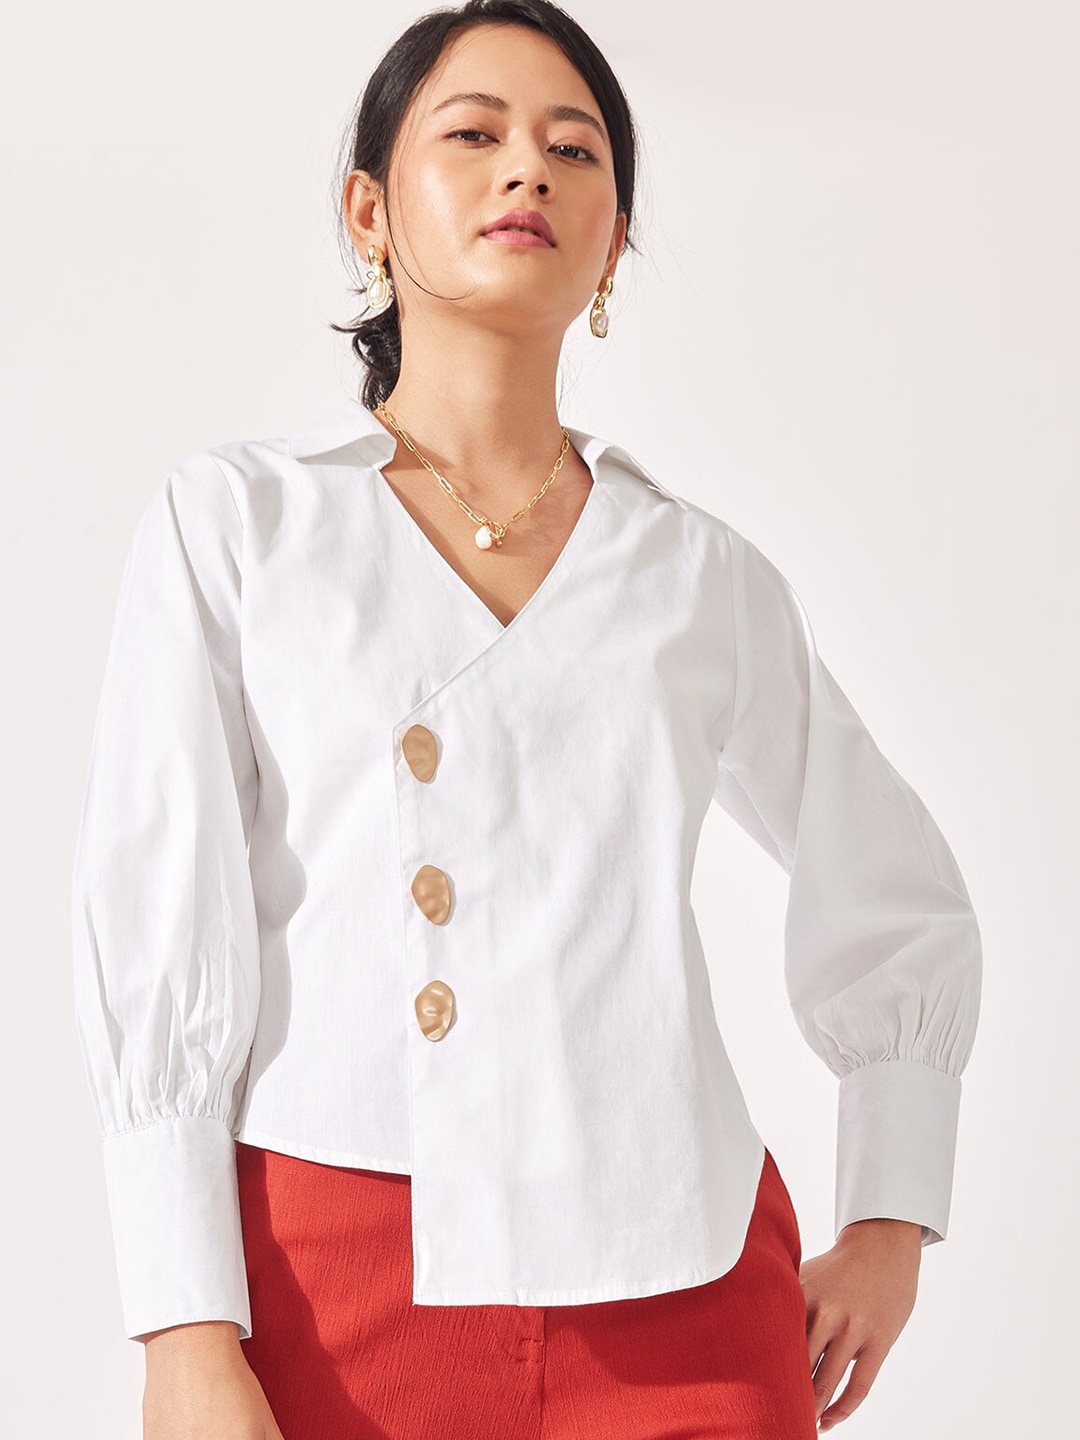 The Label Life Shirt Collar Wrap Top Price in India